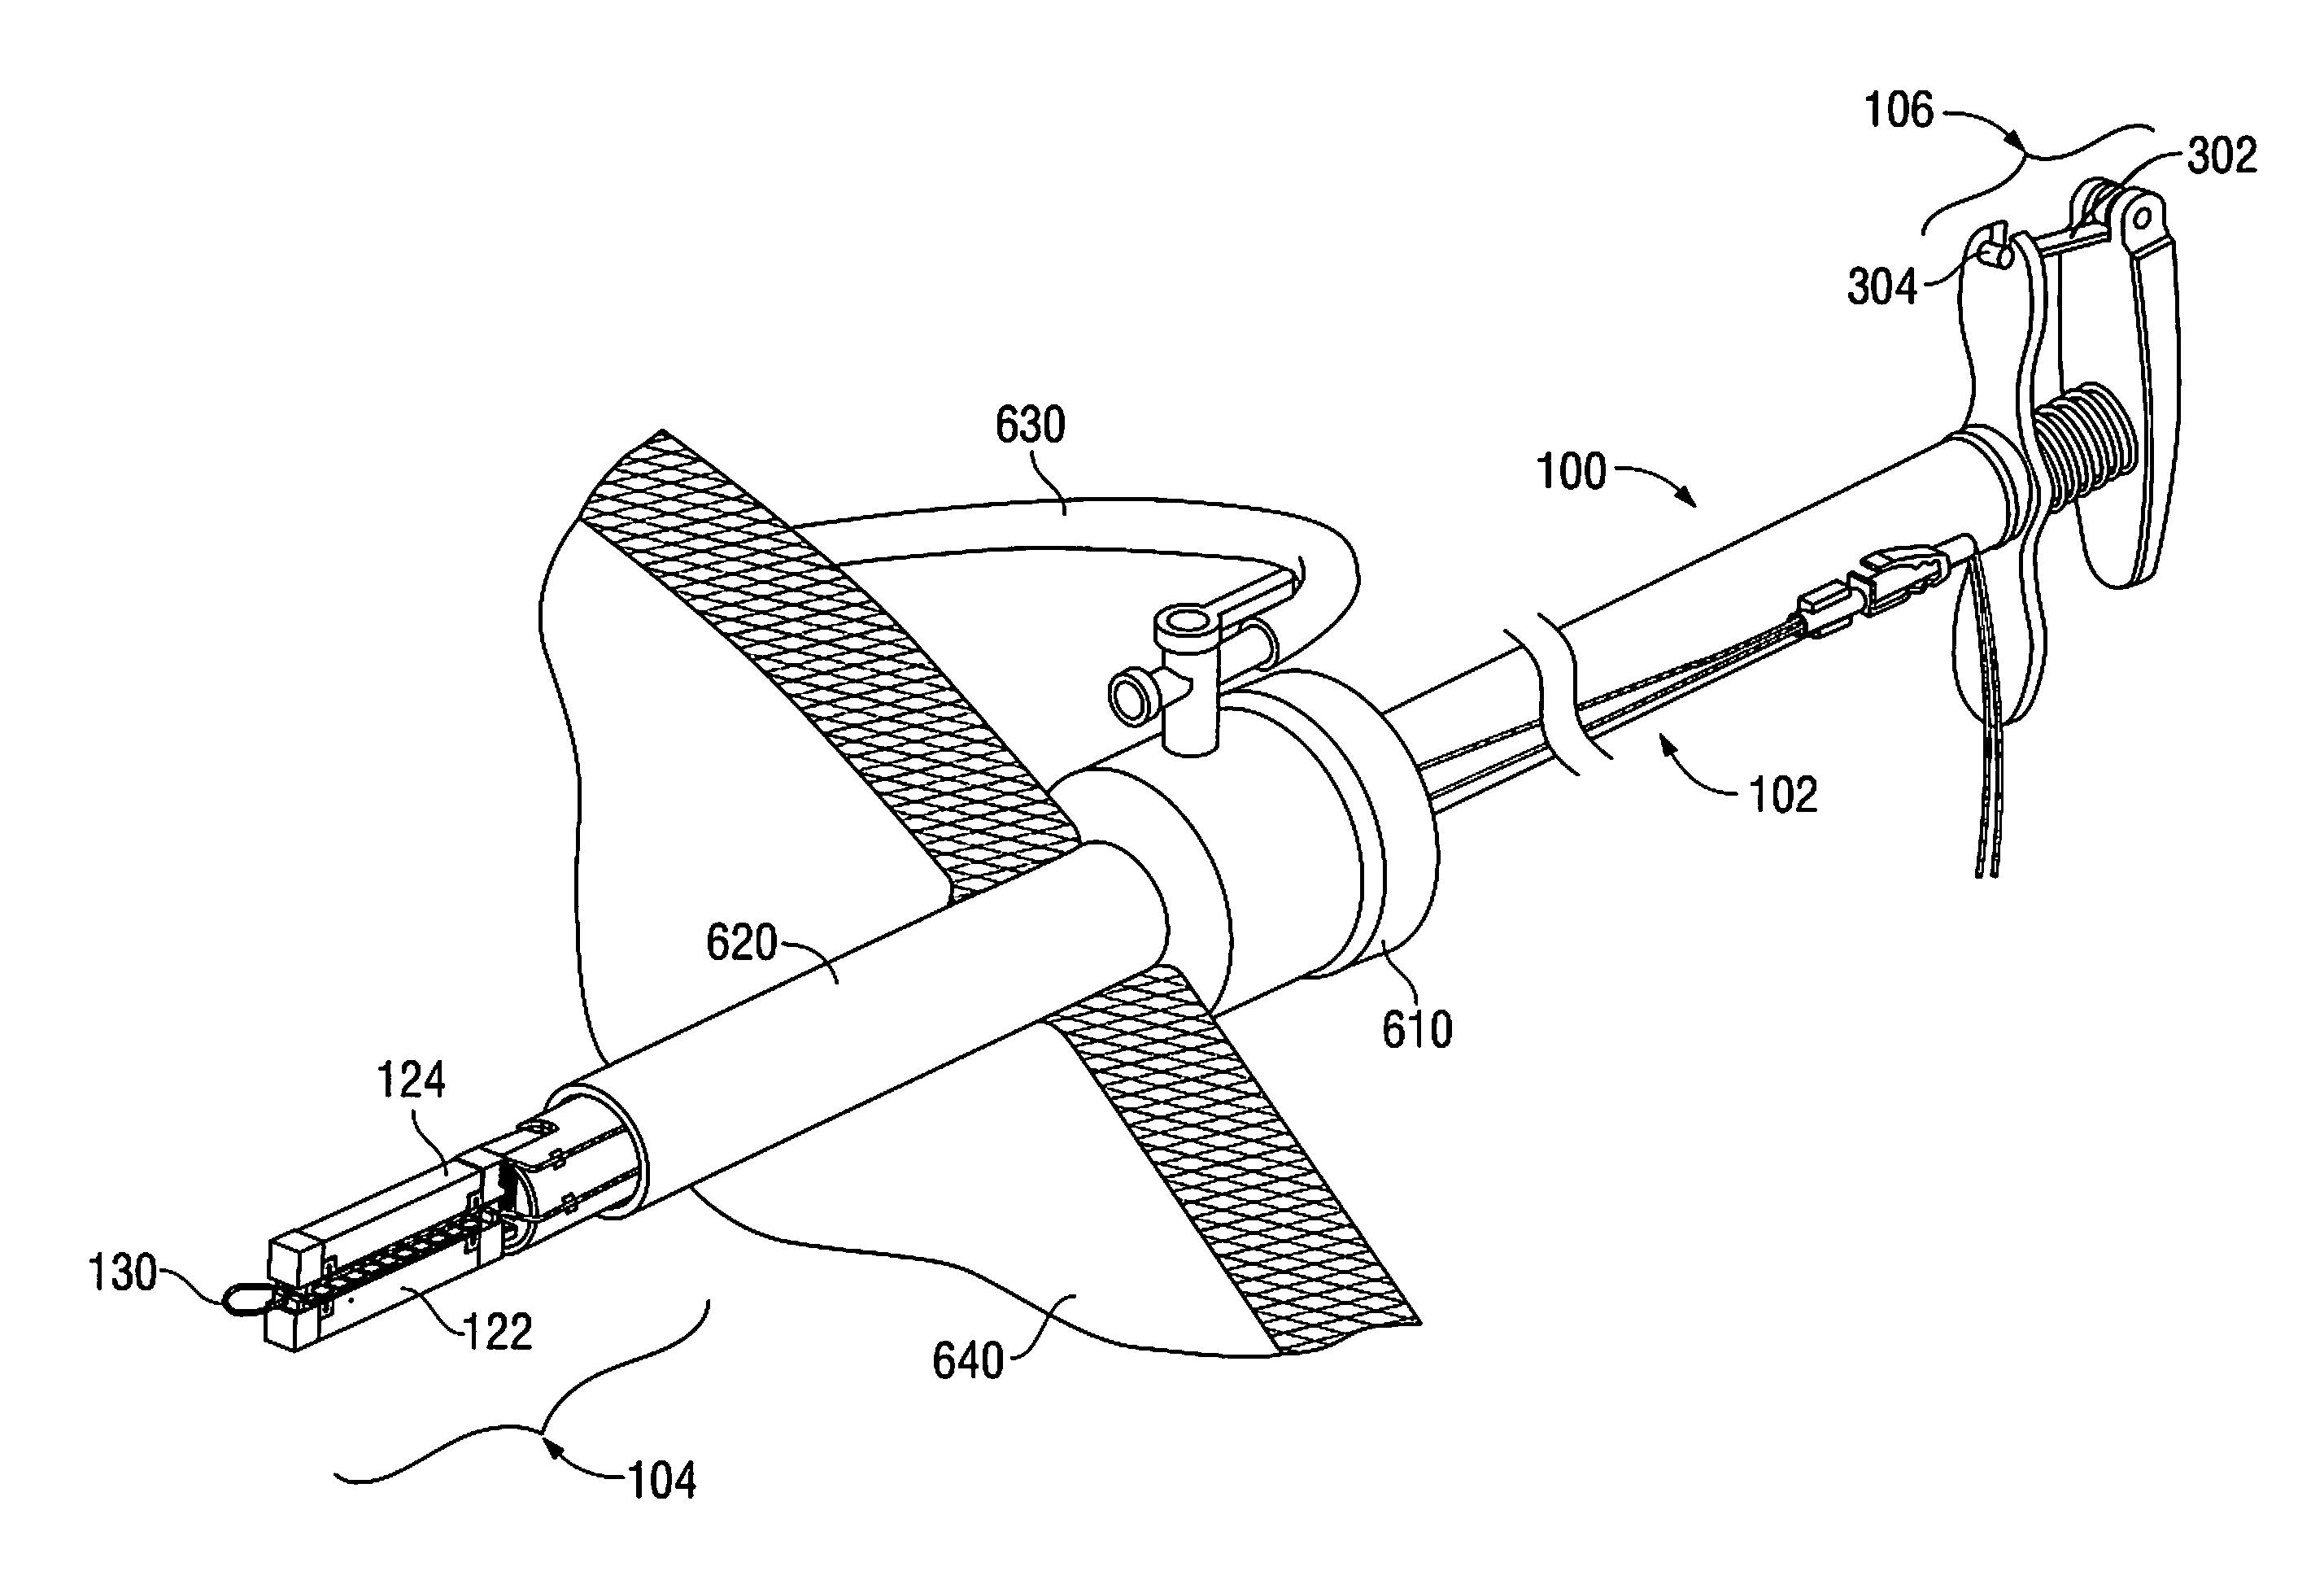 Endoscopic purse string surgical device